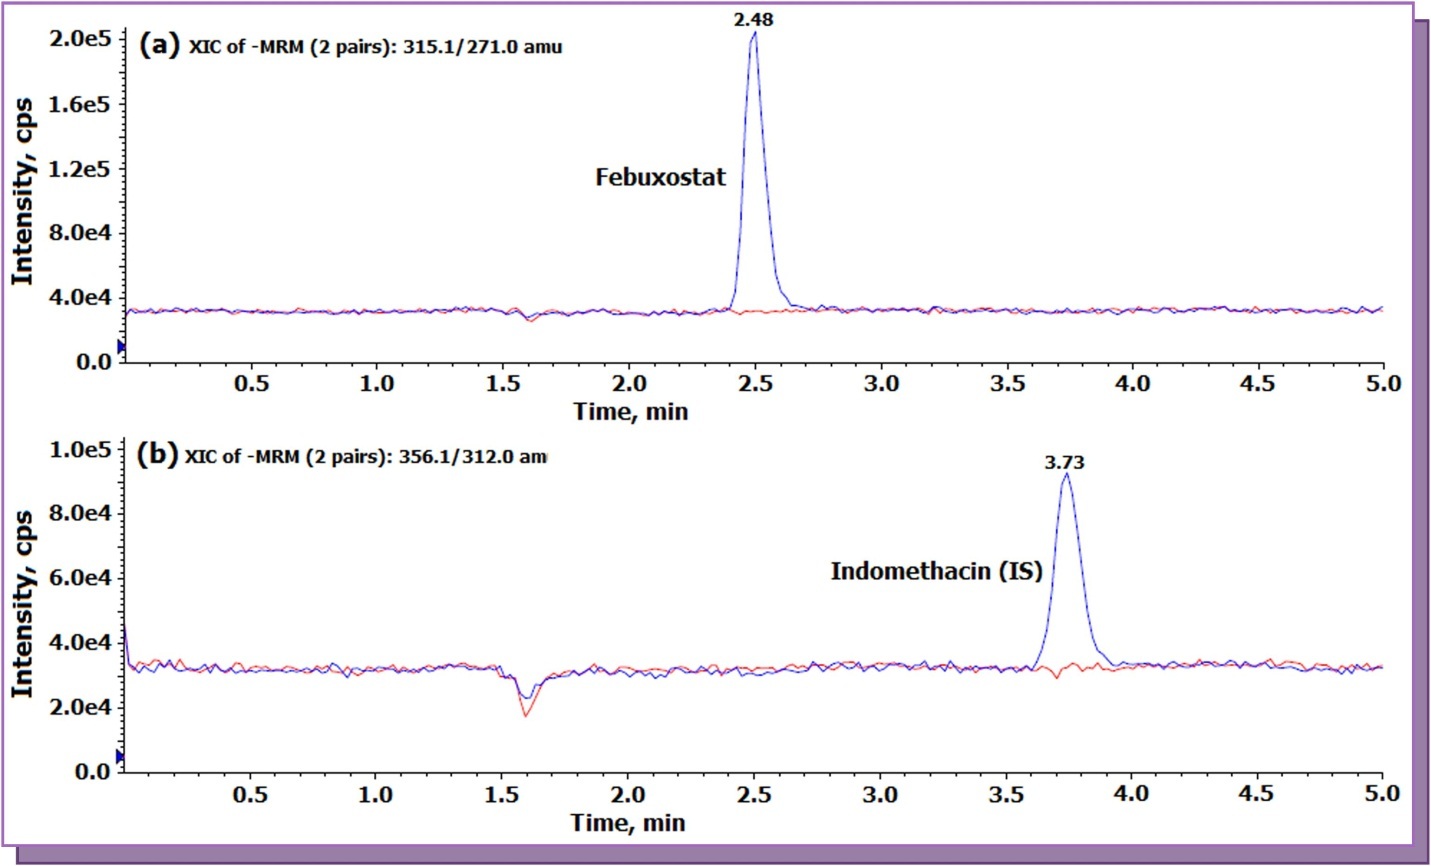  Representative post column analyte infusion MRM LC-MS/MS overlaid chromatograms for febuxostat and indomethacin (a) Exact ion current (XIC) chromatogram of Febuxostat (m/z 315.1  → 271.0 ) (b) XIC of indomethacin (IS, m/z 356.1 → 312.0).